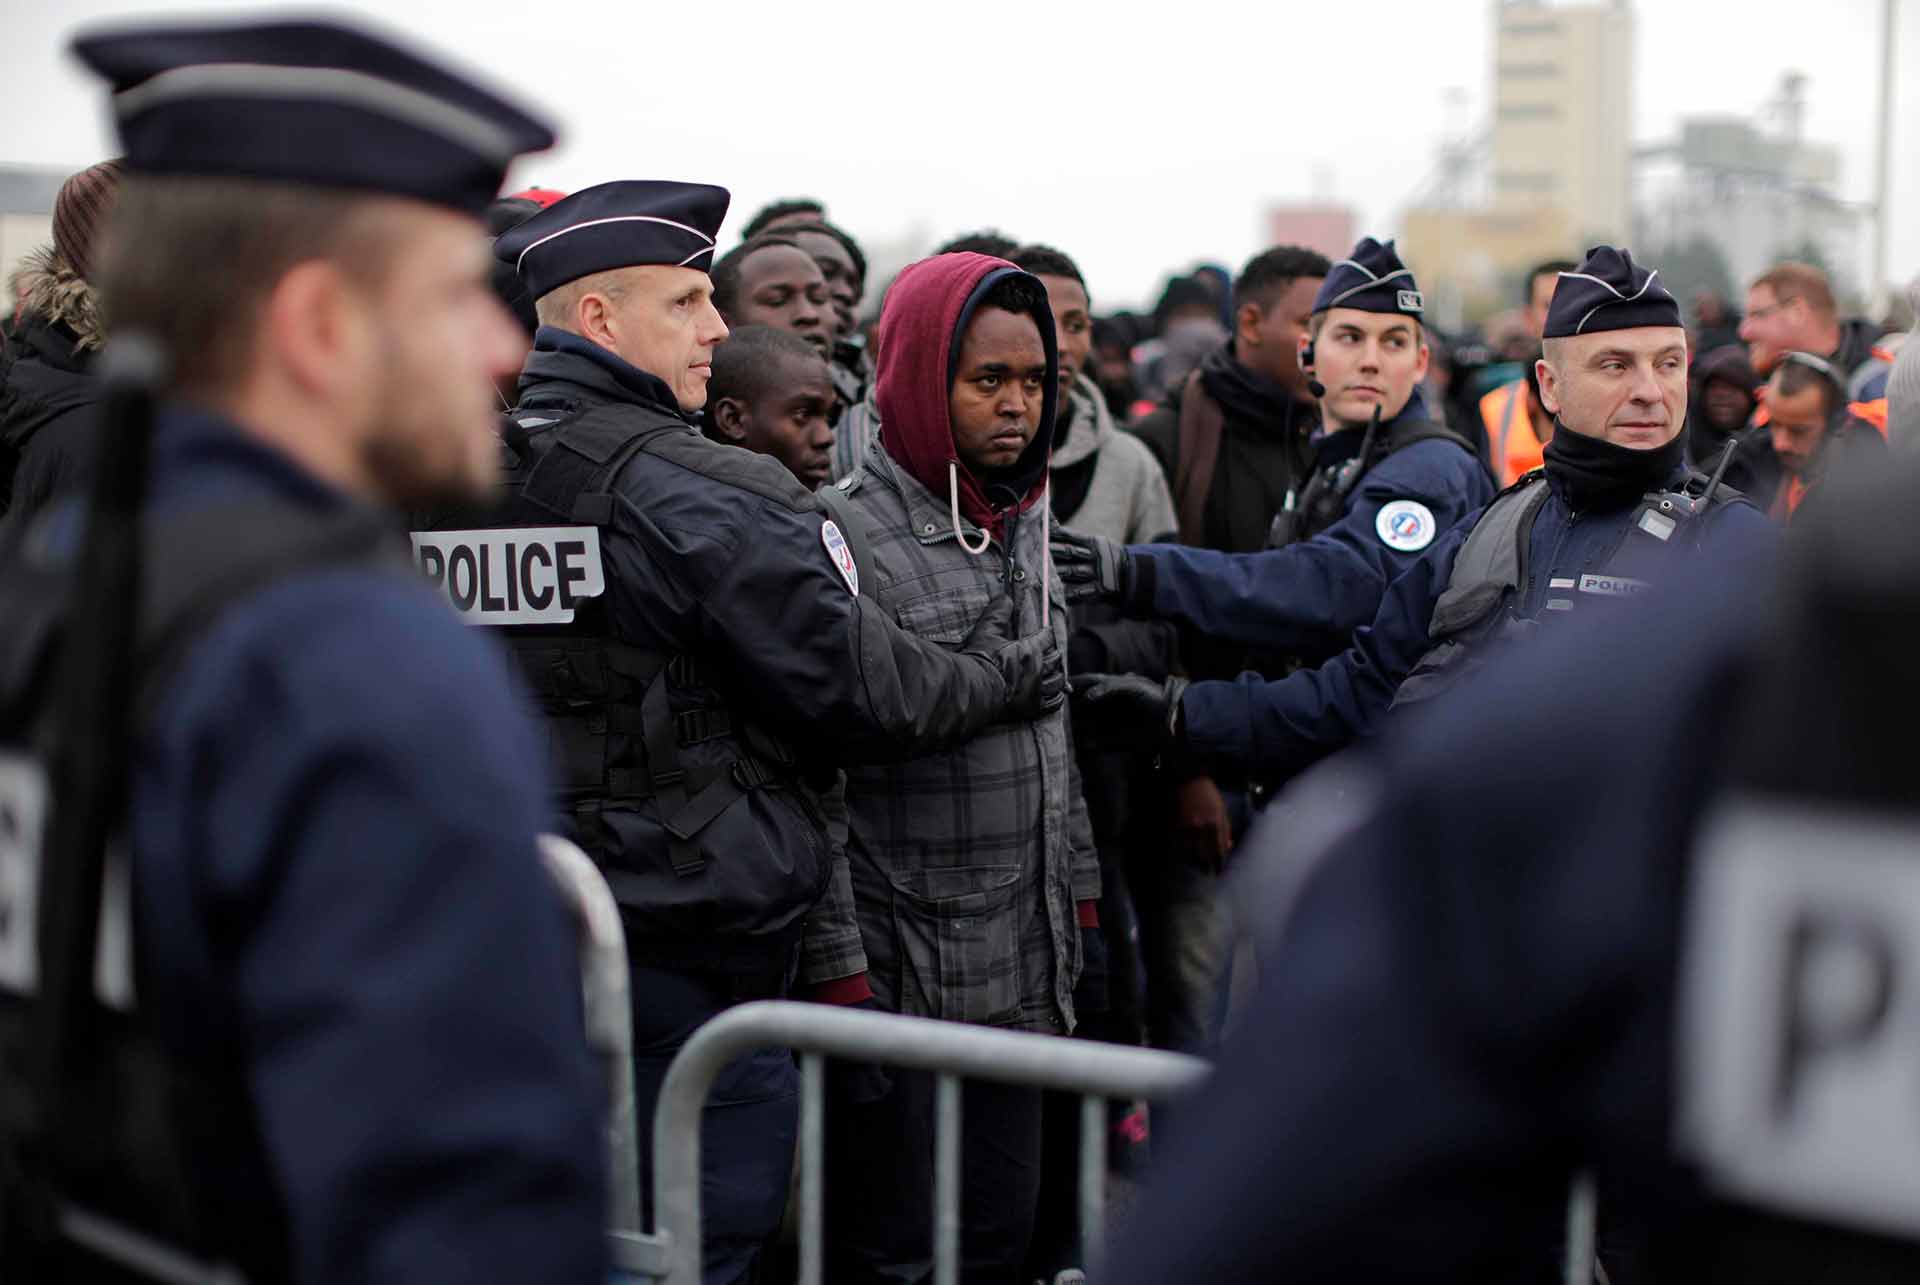 Police officers control a queue as migrants line-up to register at a processing centre in the makeshift migrant camp known as "the jungle" near Calais, northern France, Monday Oct. 24, 2016. (AP Photo/Emilio Morenatti)